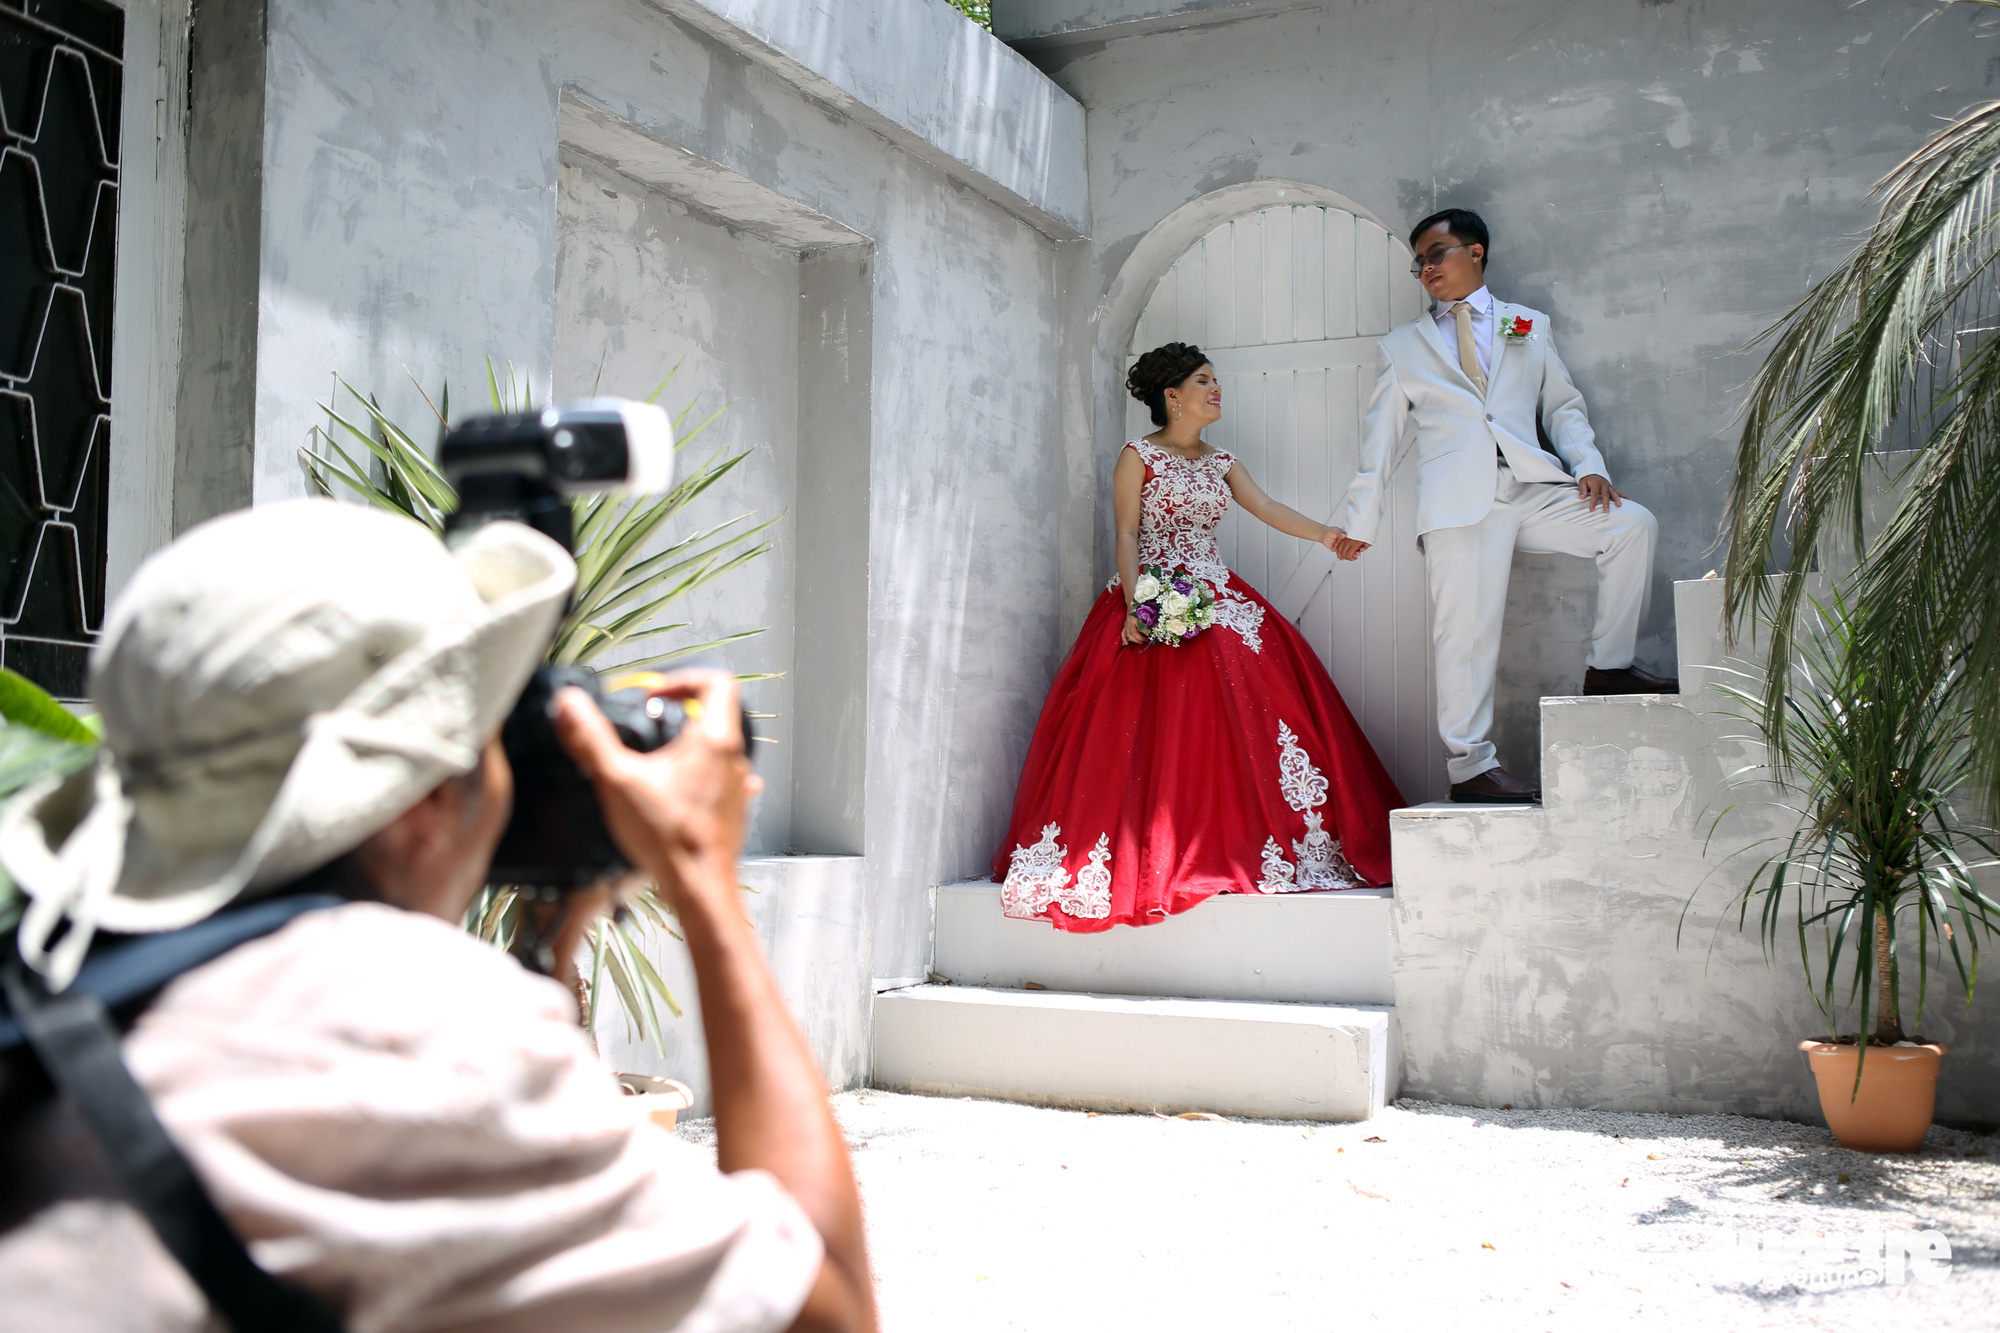 These Vietnamese photographers offer free pre-wedding photoshoots for disabled couples